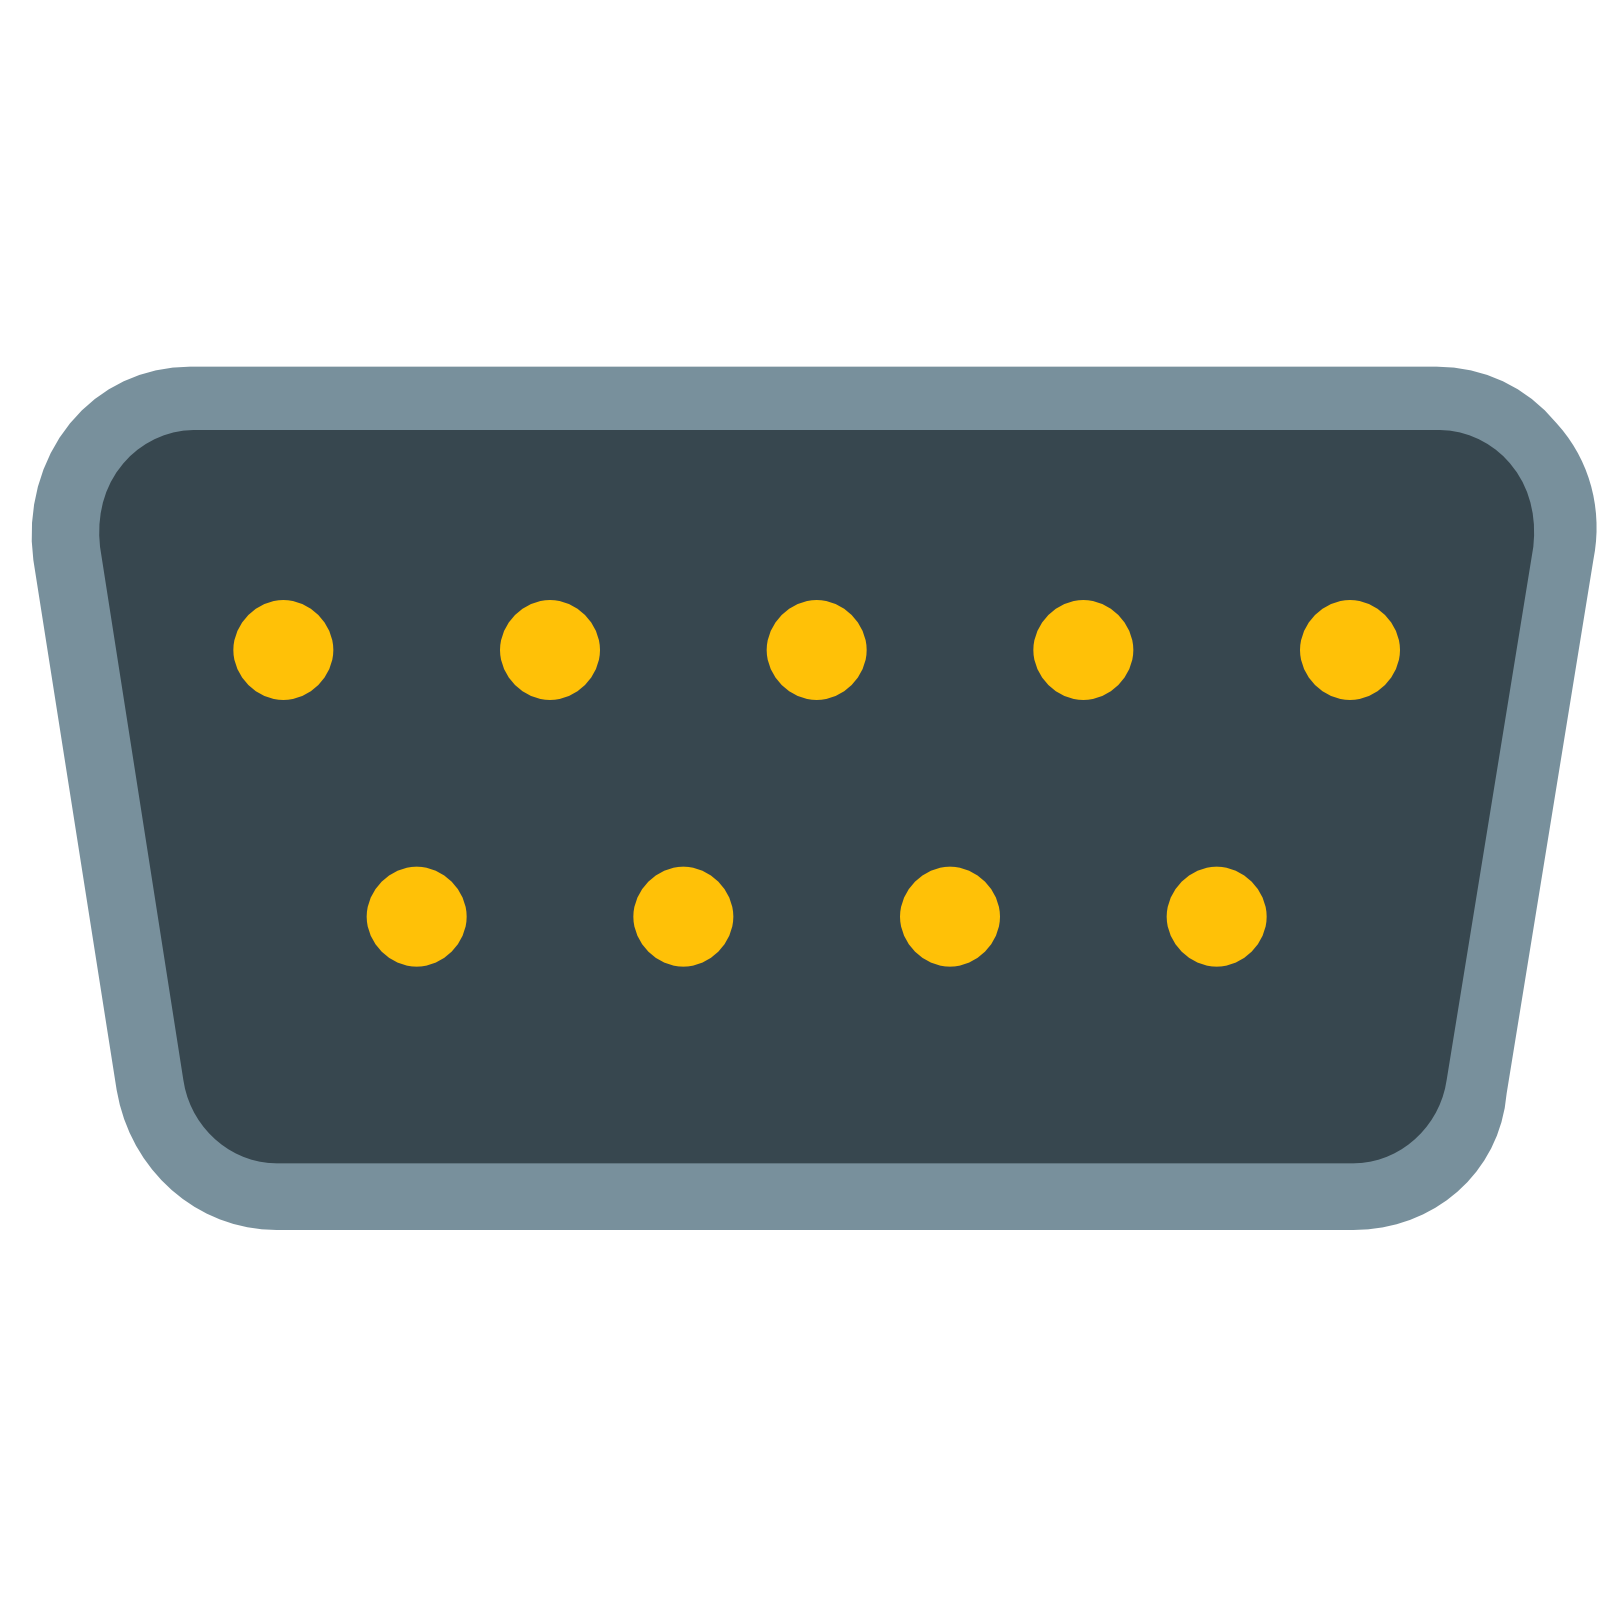 Serial port Icons - Download for Free at Icons8'